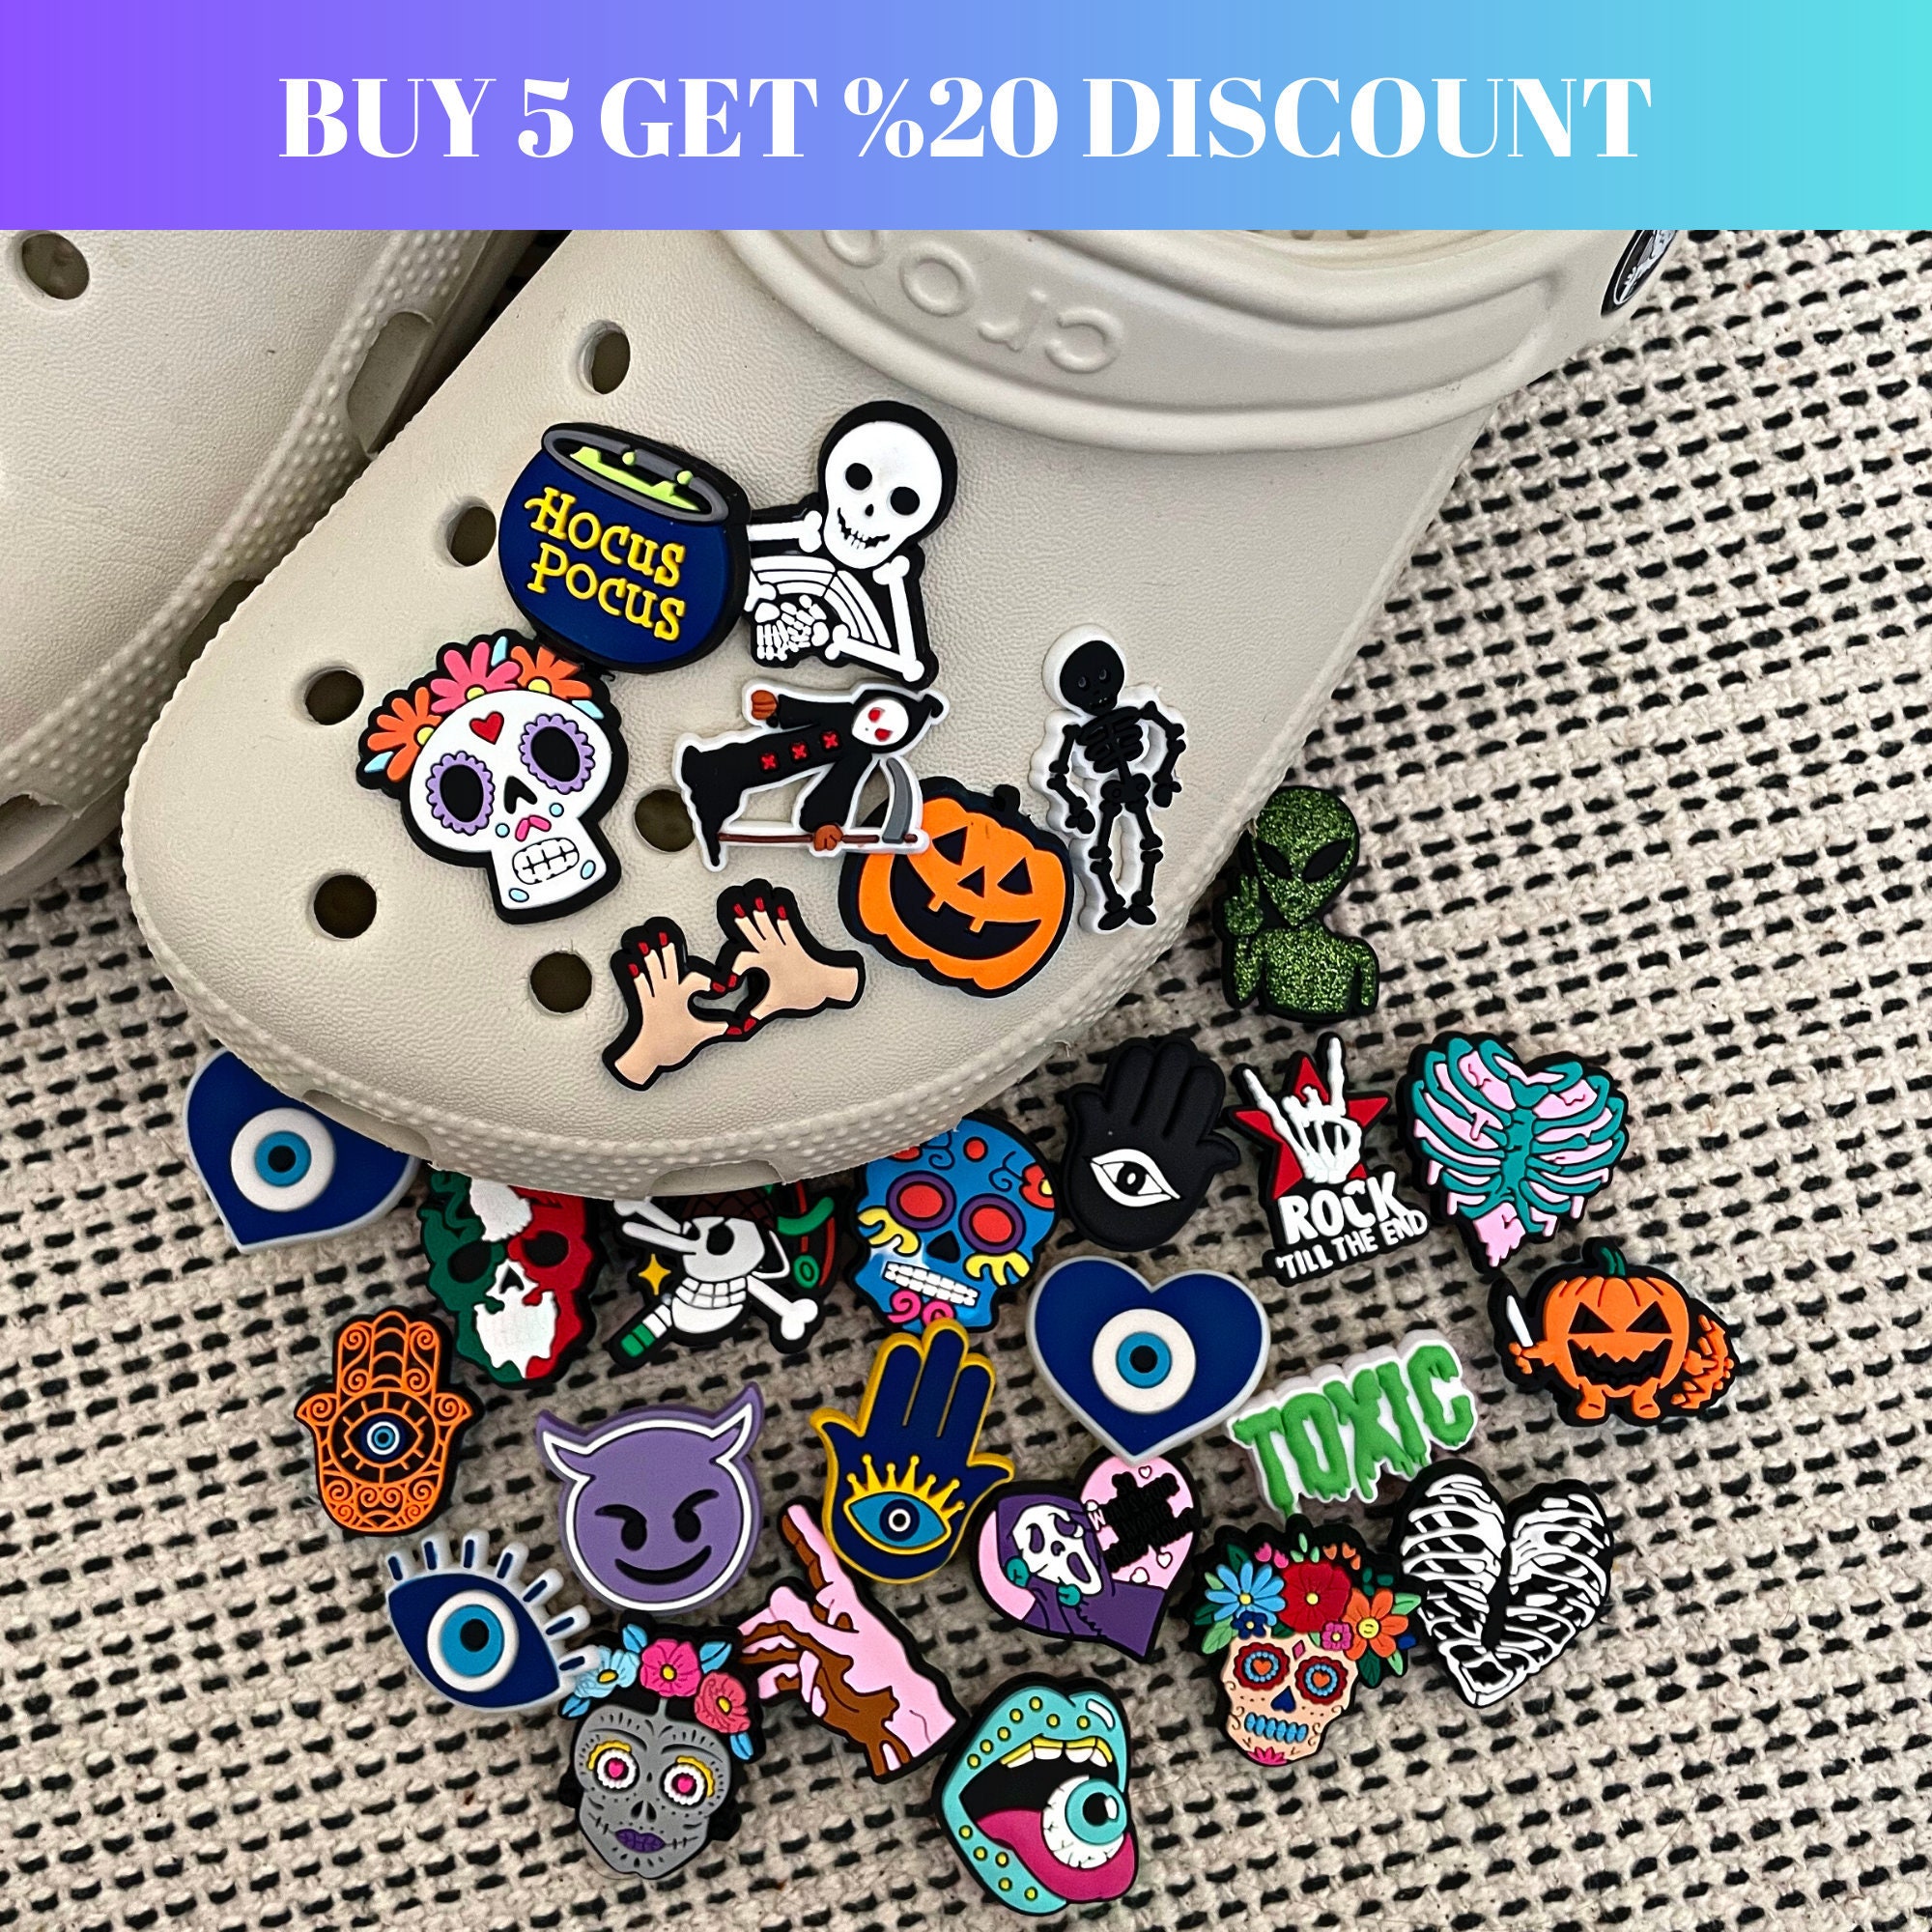 24pc Lot of Scary Character Shoe Charms for Crocs Clogs: Ghostface Chucky &  Mor